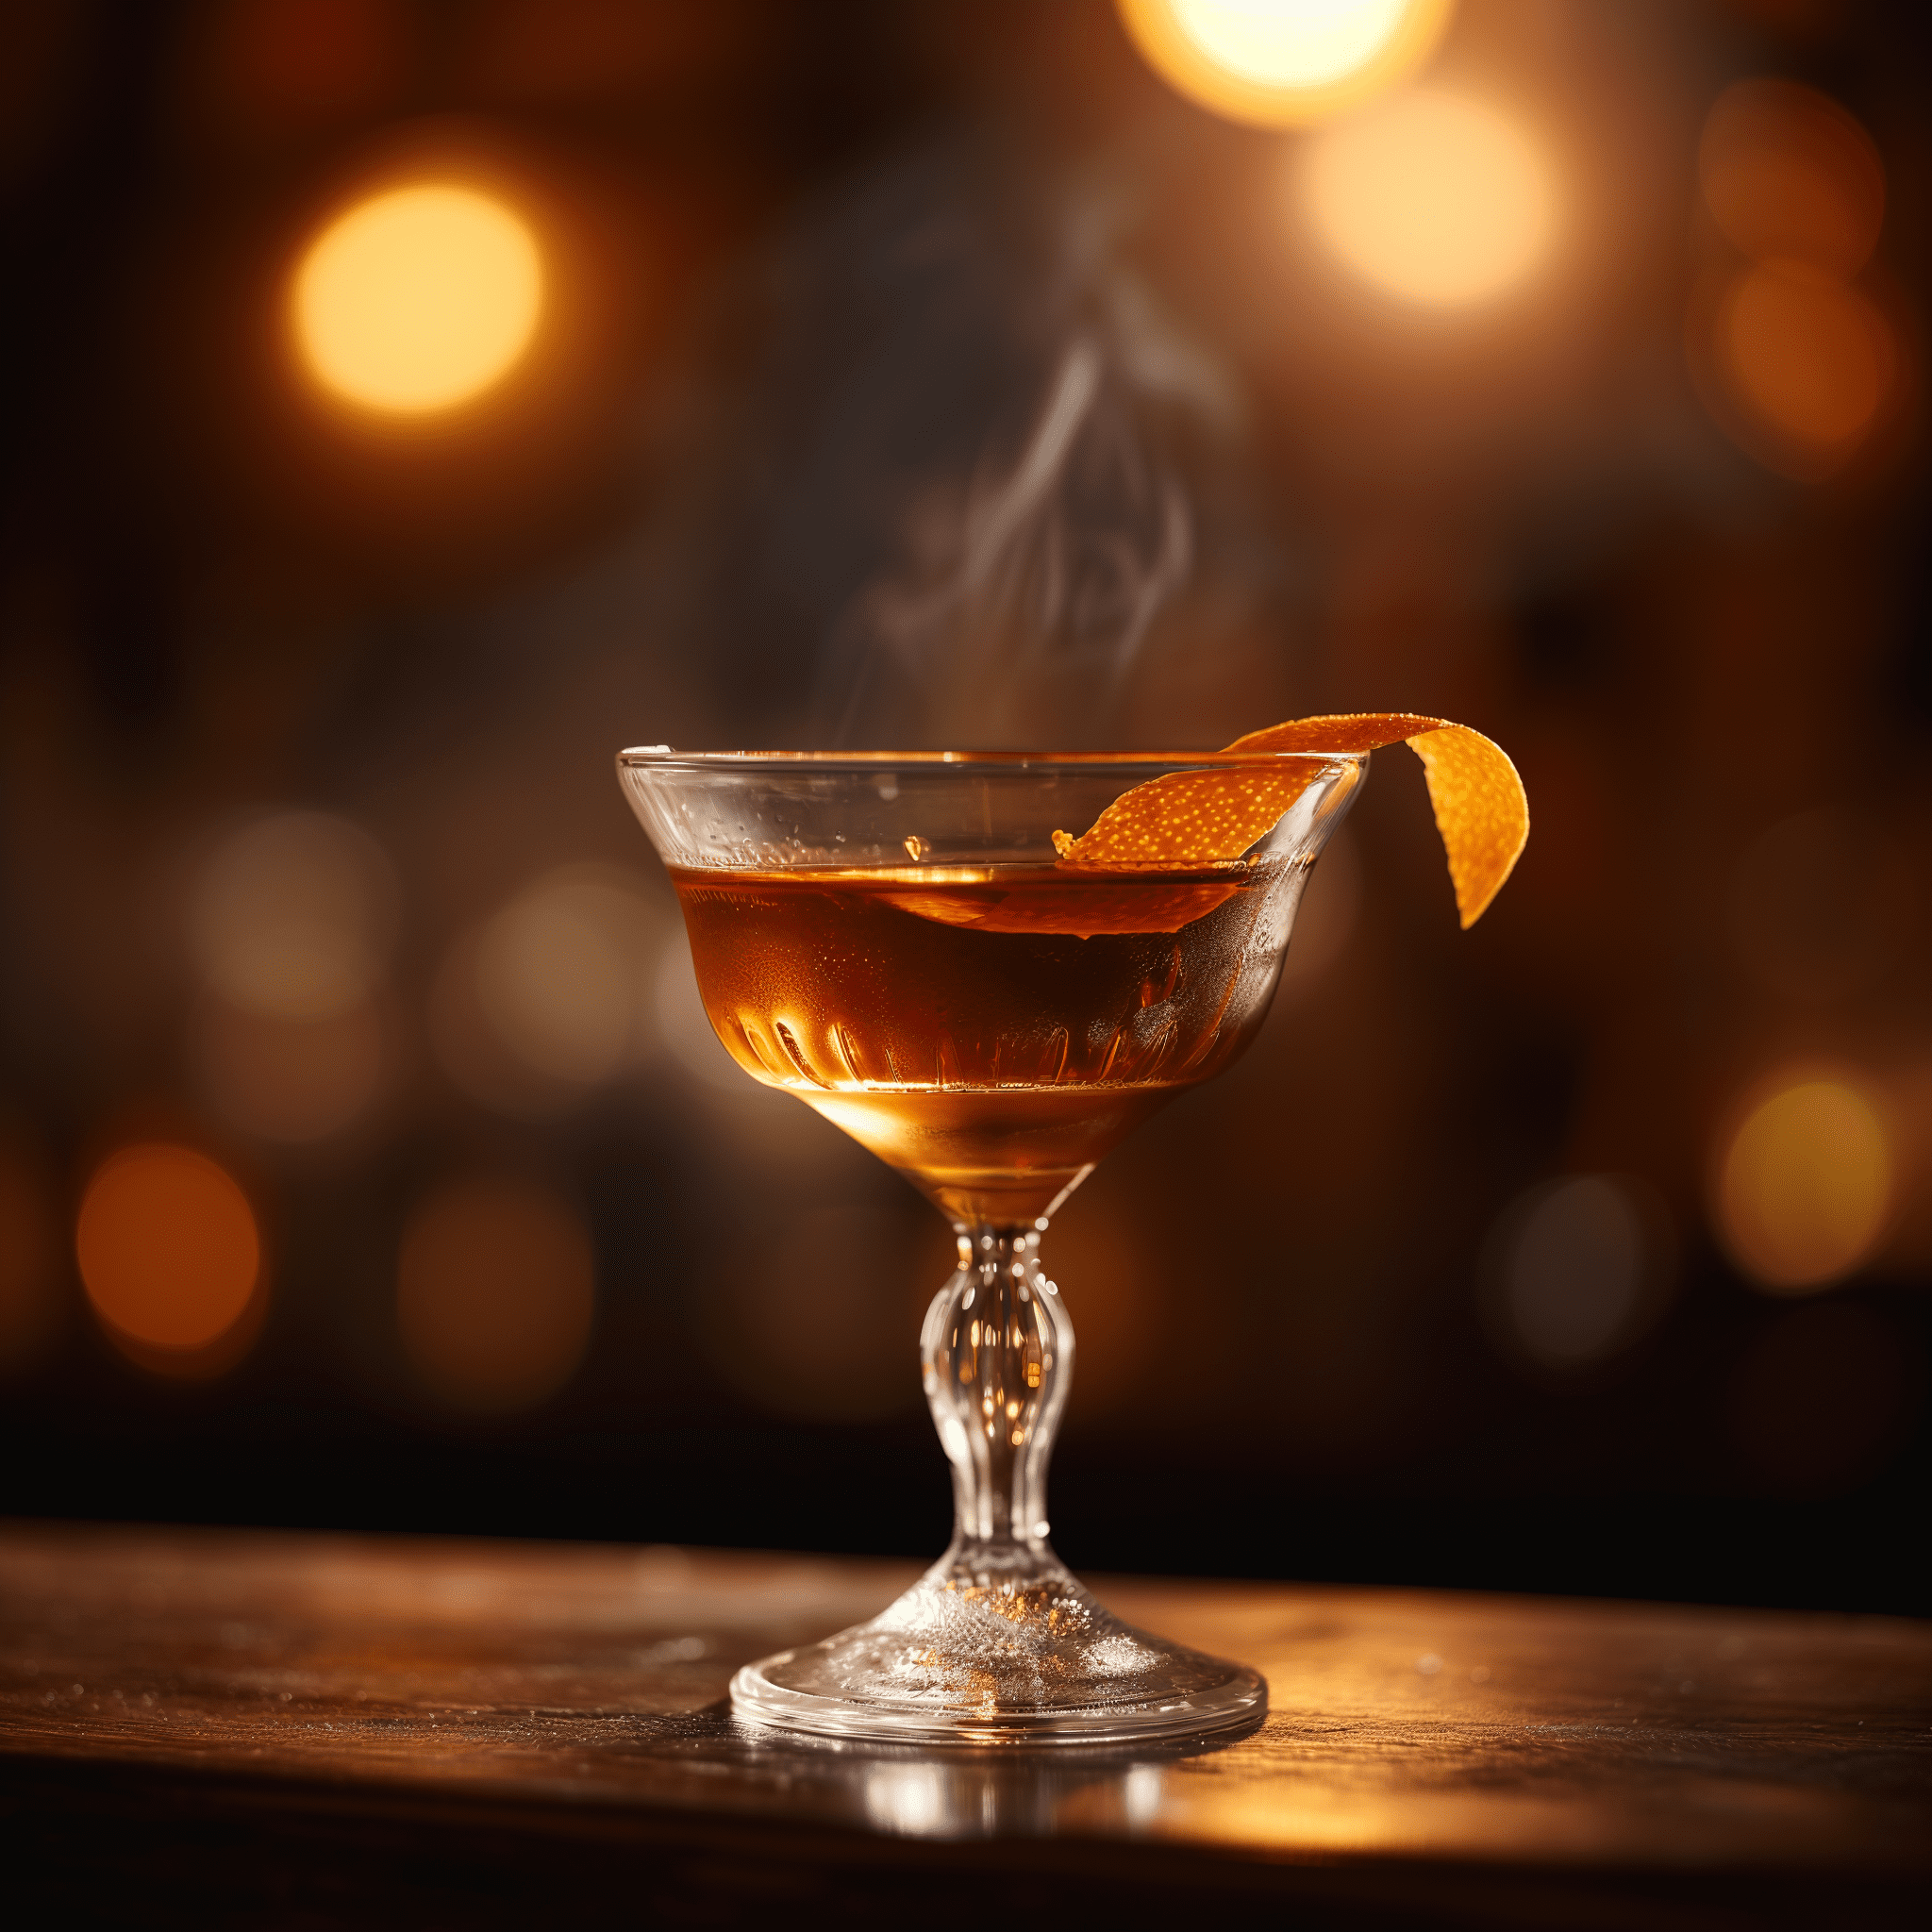 Devil's Soul Cocktail Recipe - Devil's Soul is a cocktail with a soul-stirring blend of smokiness from the mezcal, the spicy warmth of rye whiskey, and the herbal bitterness of amaro. The orange bitters and elderflower add a floral and citrusy complexity, making it a layered and intriguing drink.